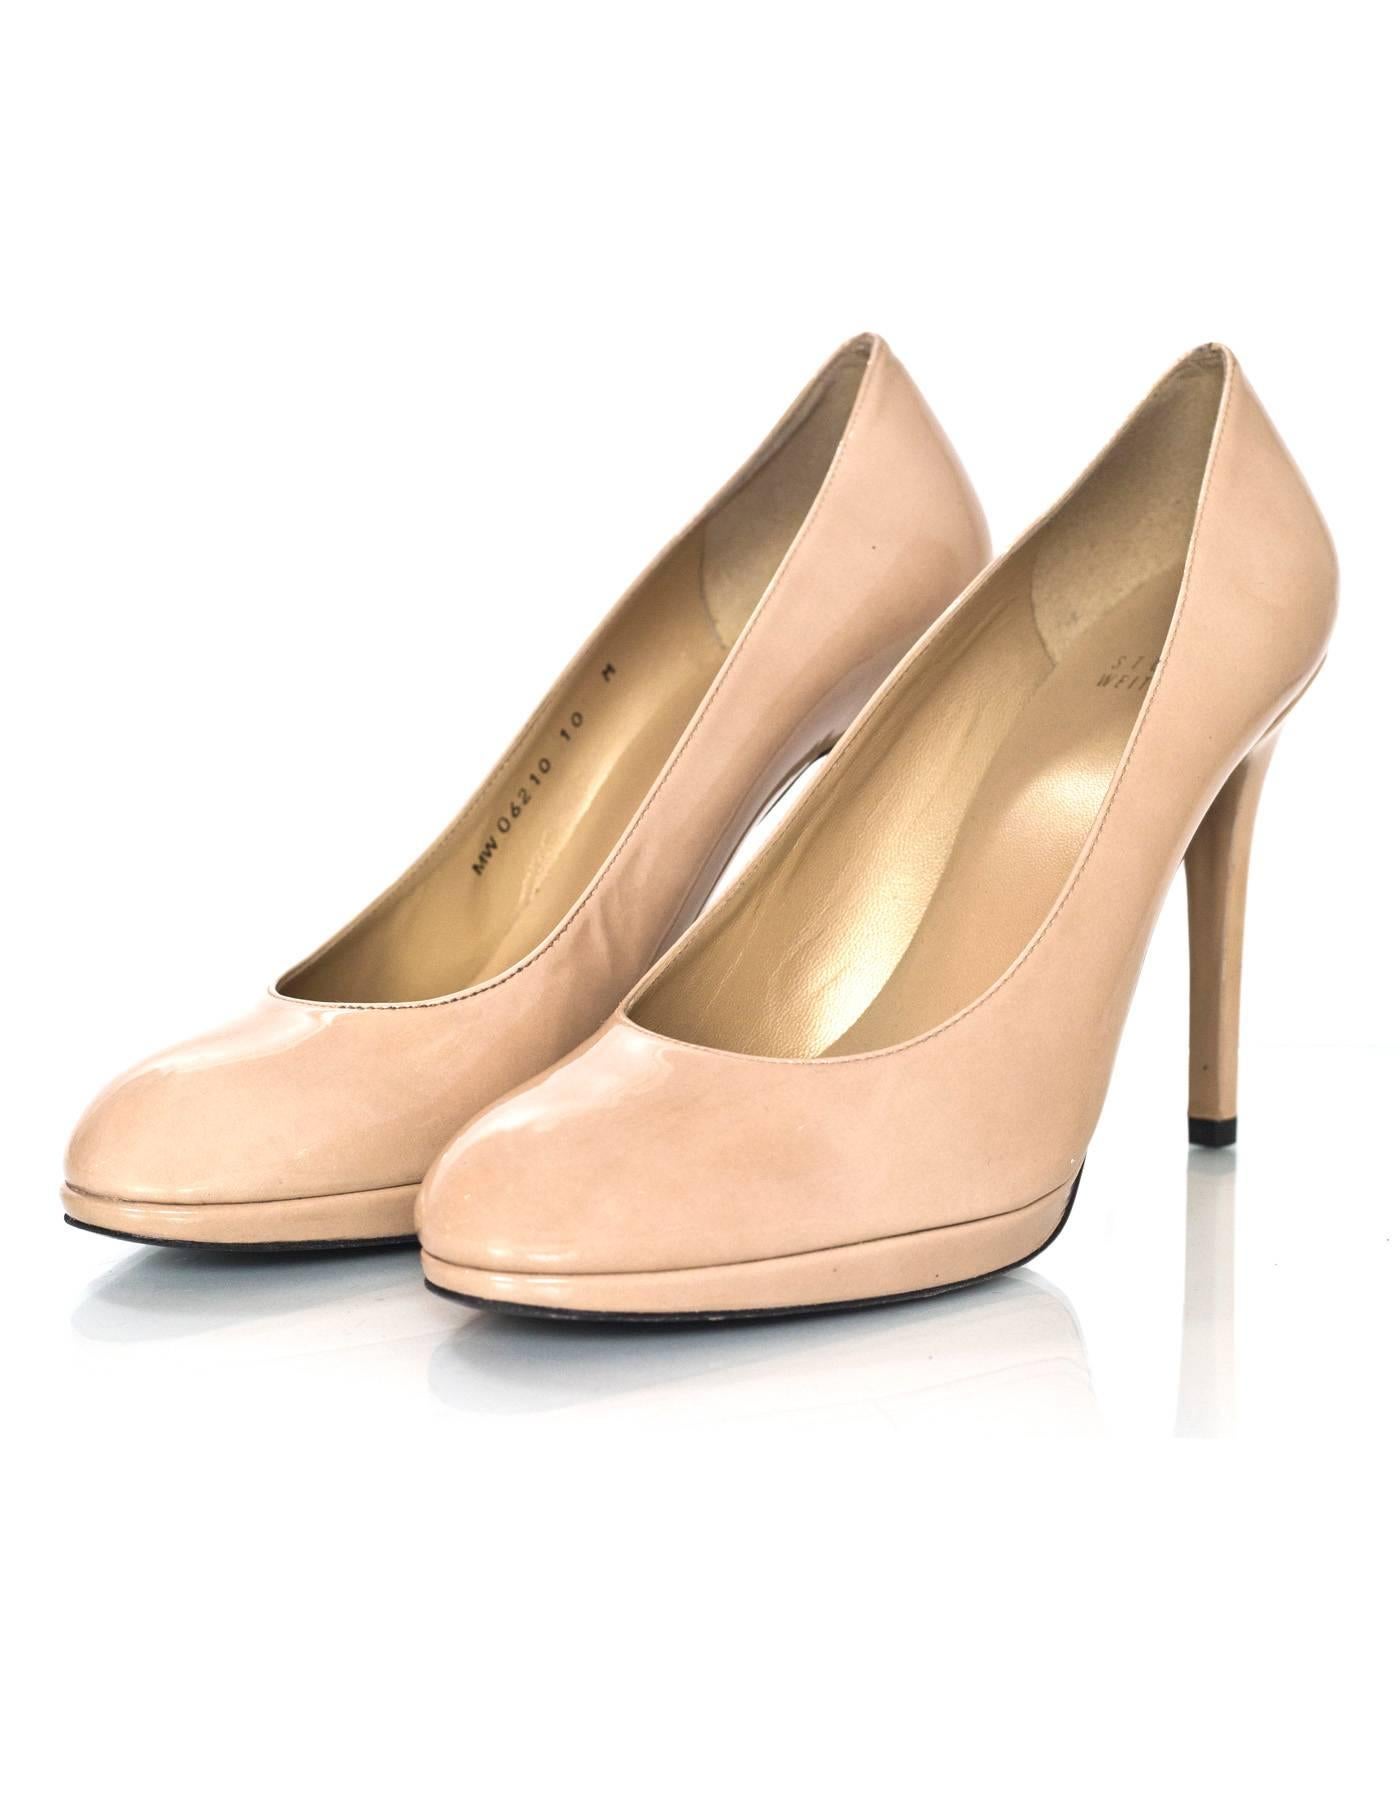 Stuart Weitzman Nude Patent Platswoon Pumps Sz 10

Made In: Spain
Color: Nude
Materials: Patent leather
Closure/Opening: Slide on
Sole Stamp: Stuart Weitzman Leather Sole Made In Spain
Overall Condition: Excellent pre-owned condition with the